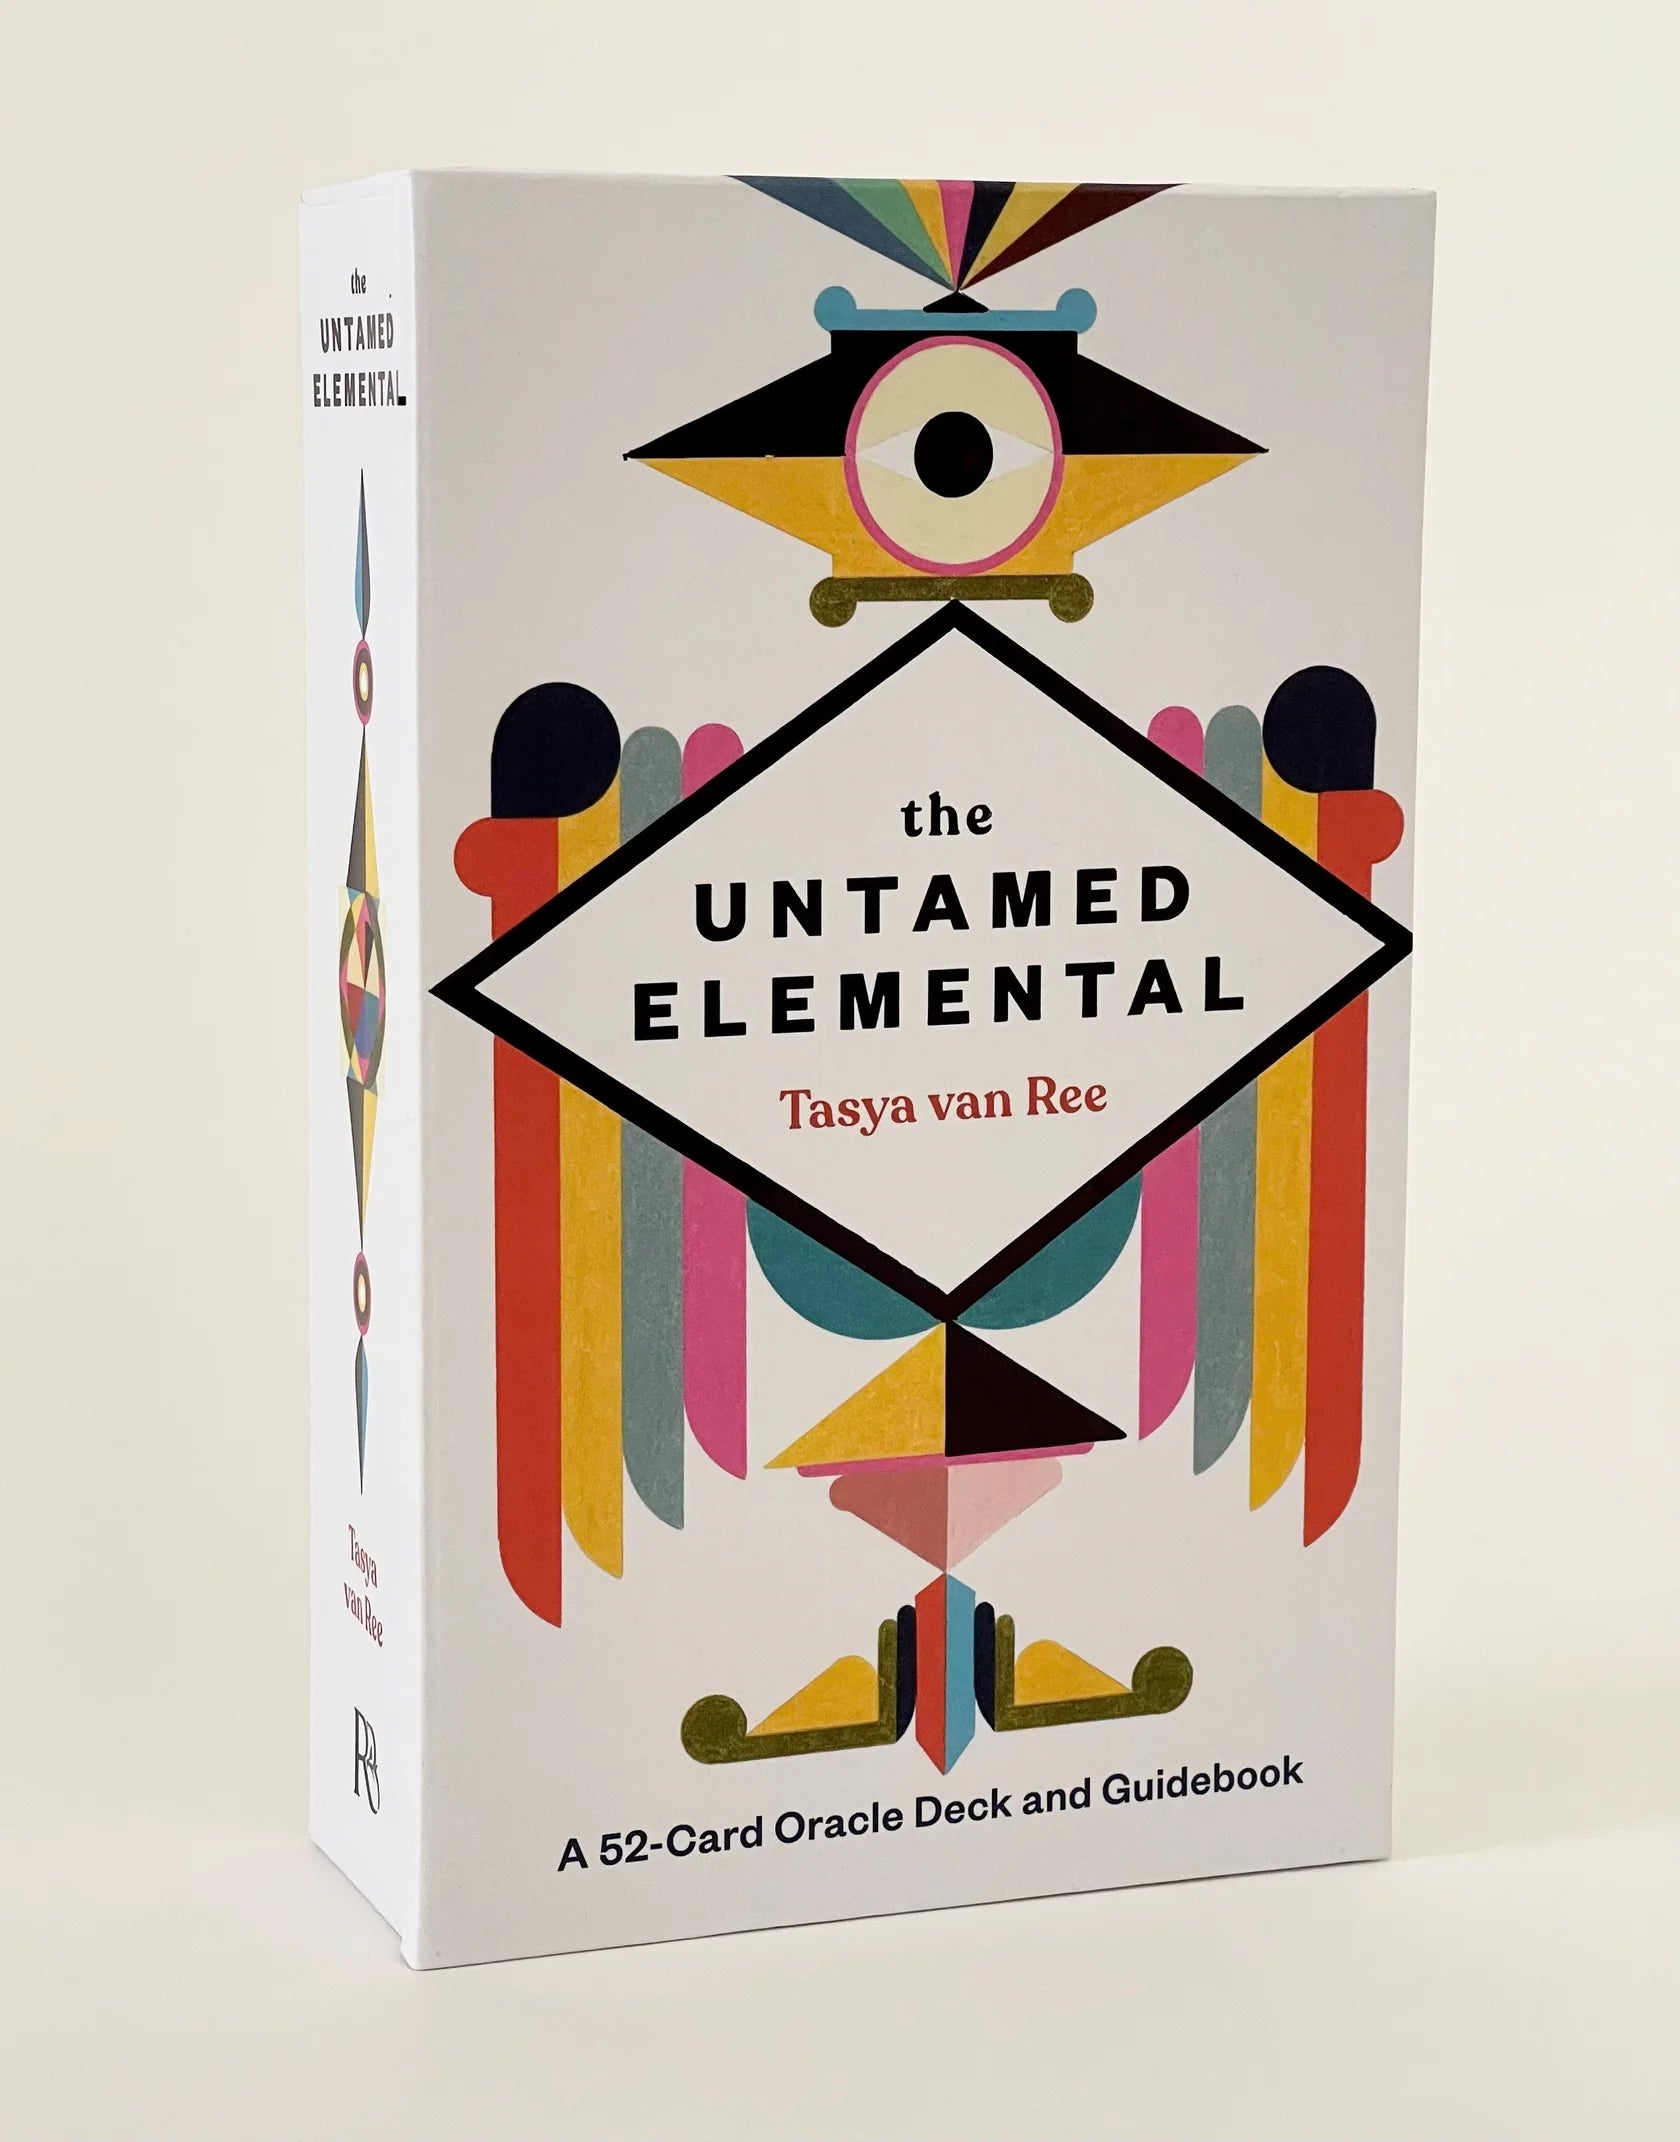 The Untamed Elemental - Oracle Deck & Guide Book